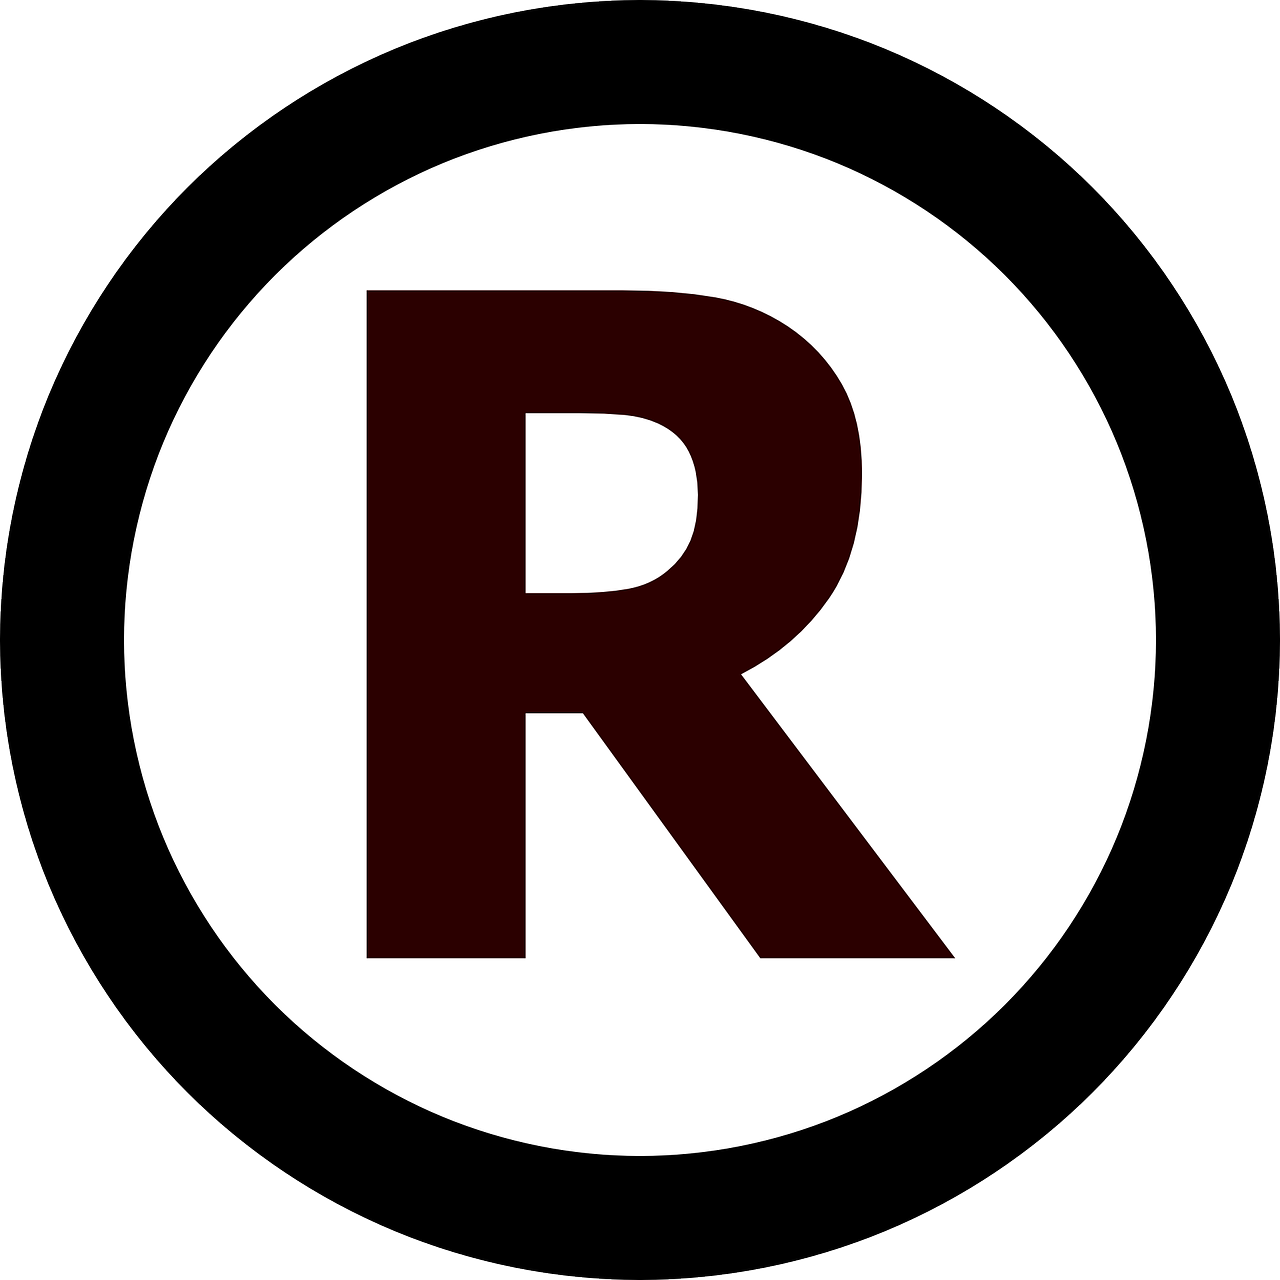 How to Avoid These Common Trademark Registration Pitfalls